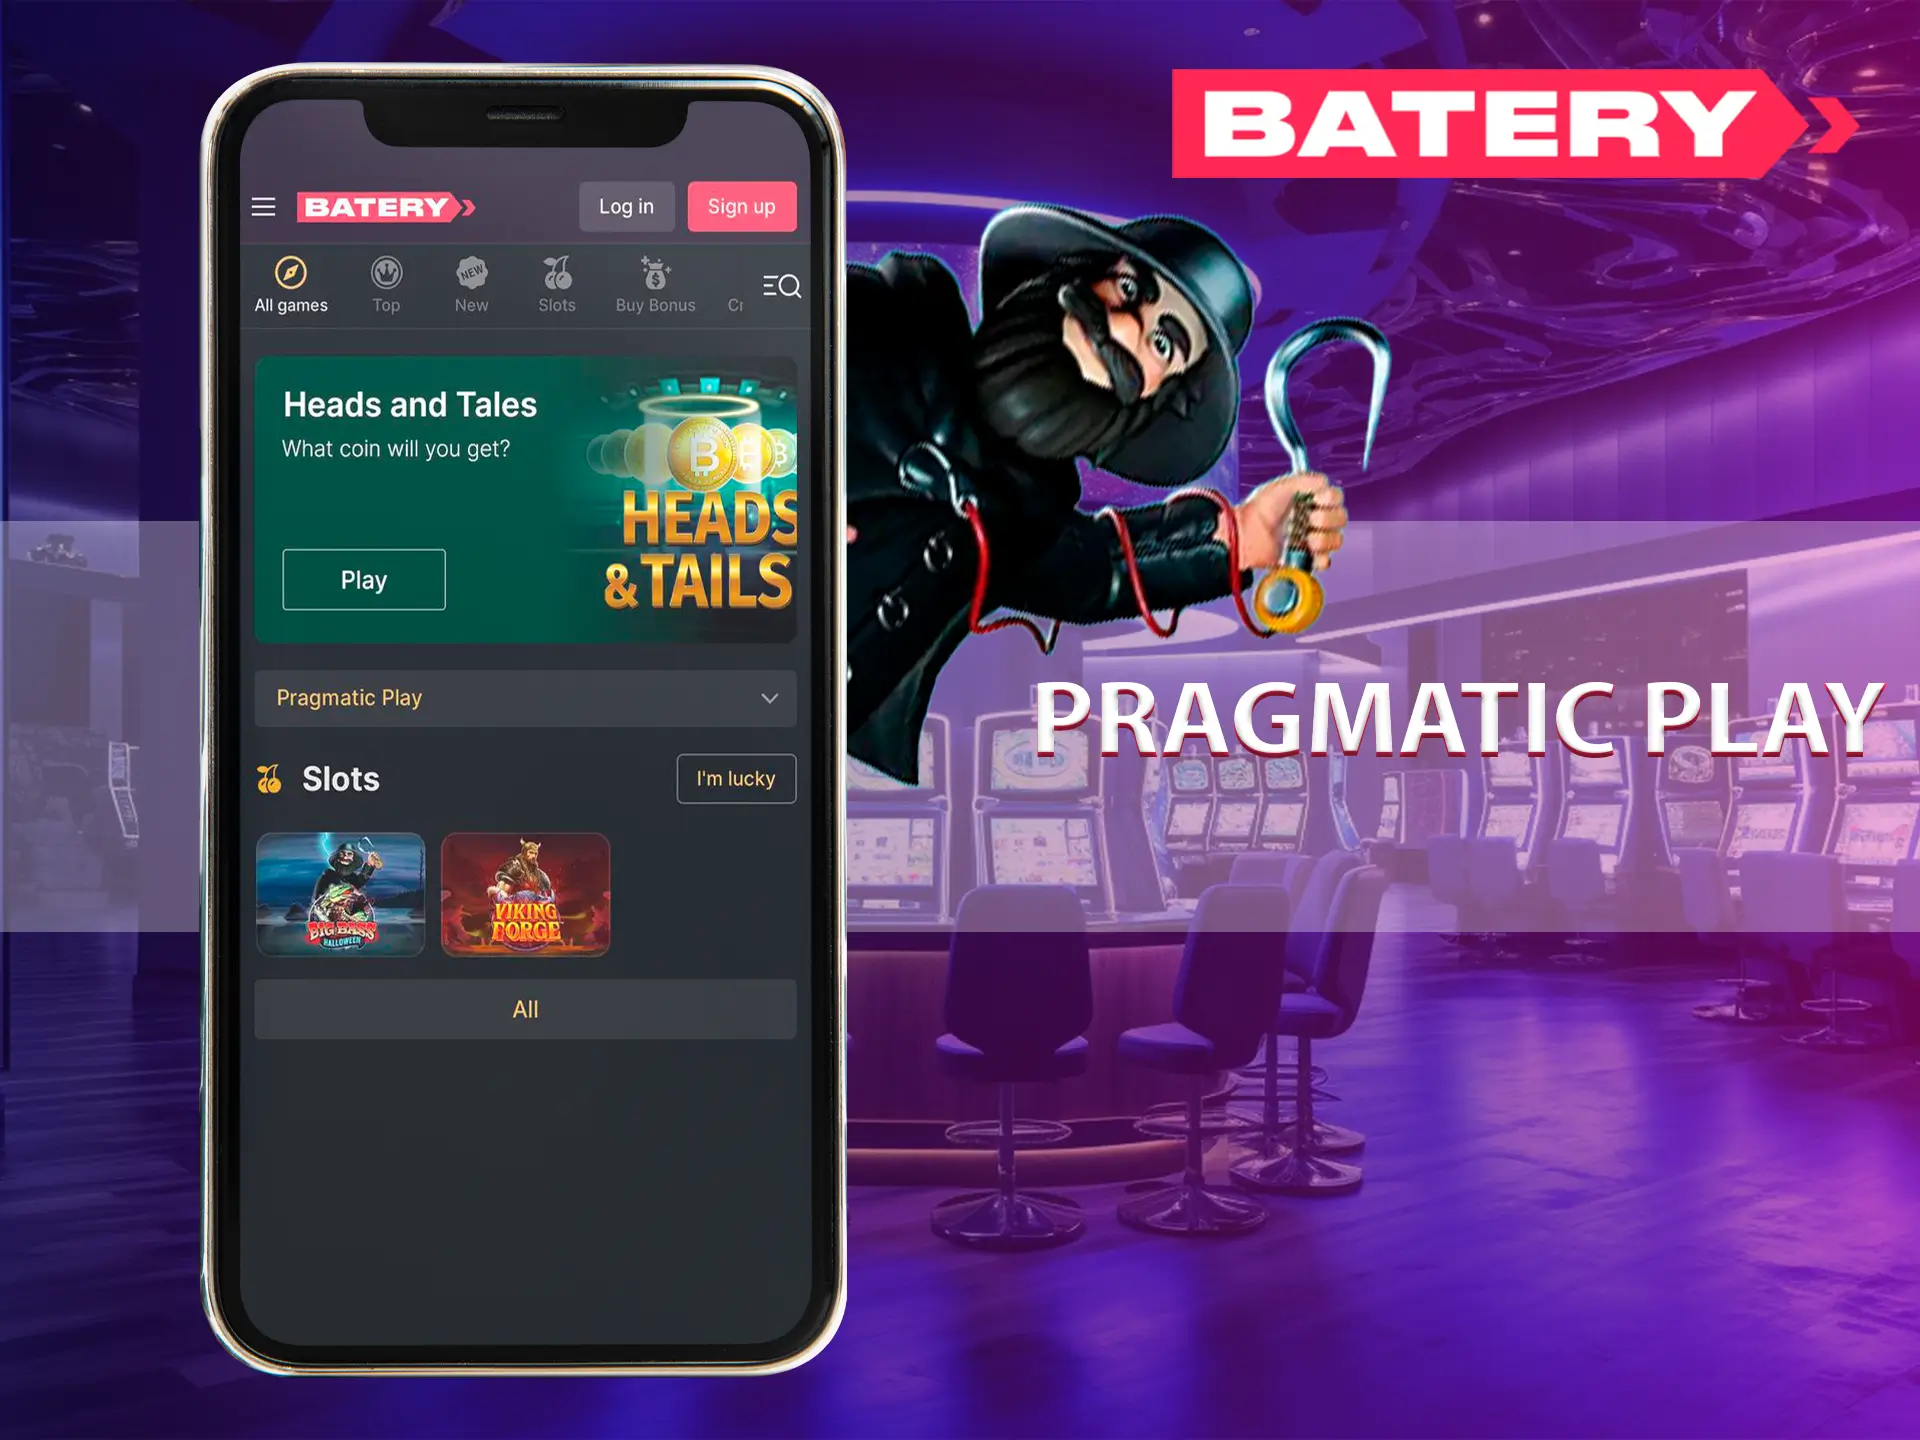 Pragmatic is a favorite among the slot game providers at Batery.